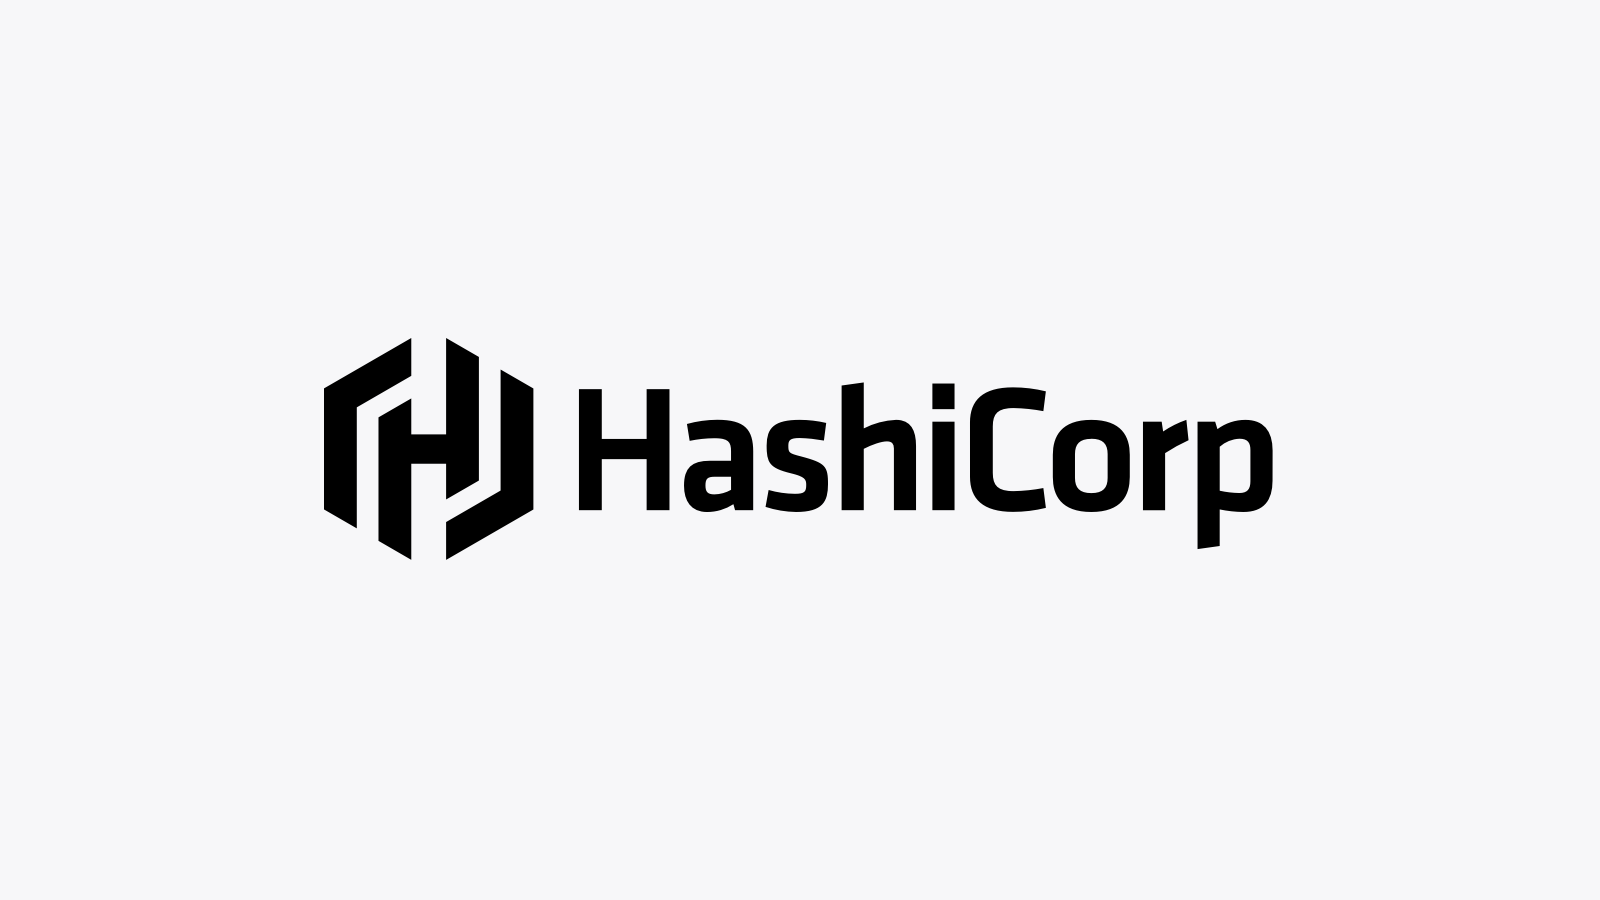 HashiCorp Assistance During COVID-19